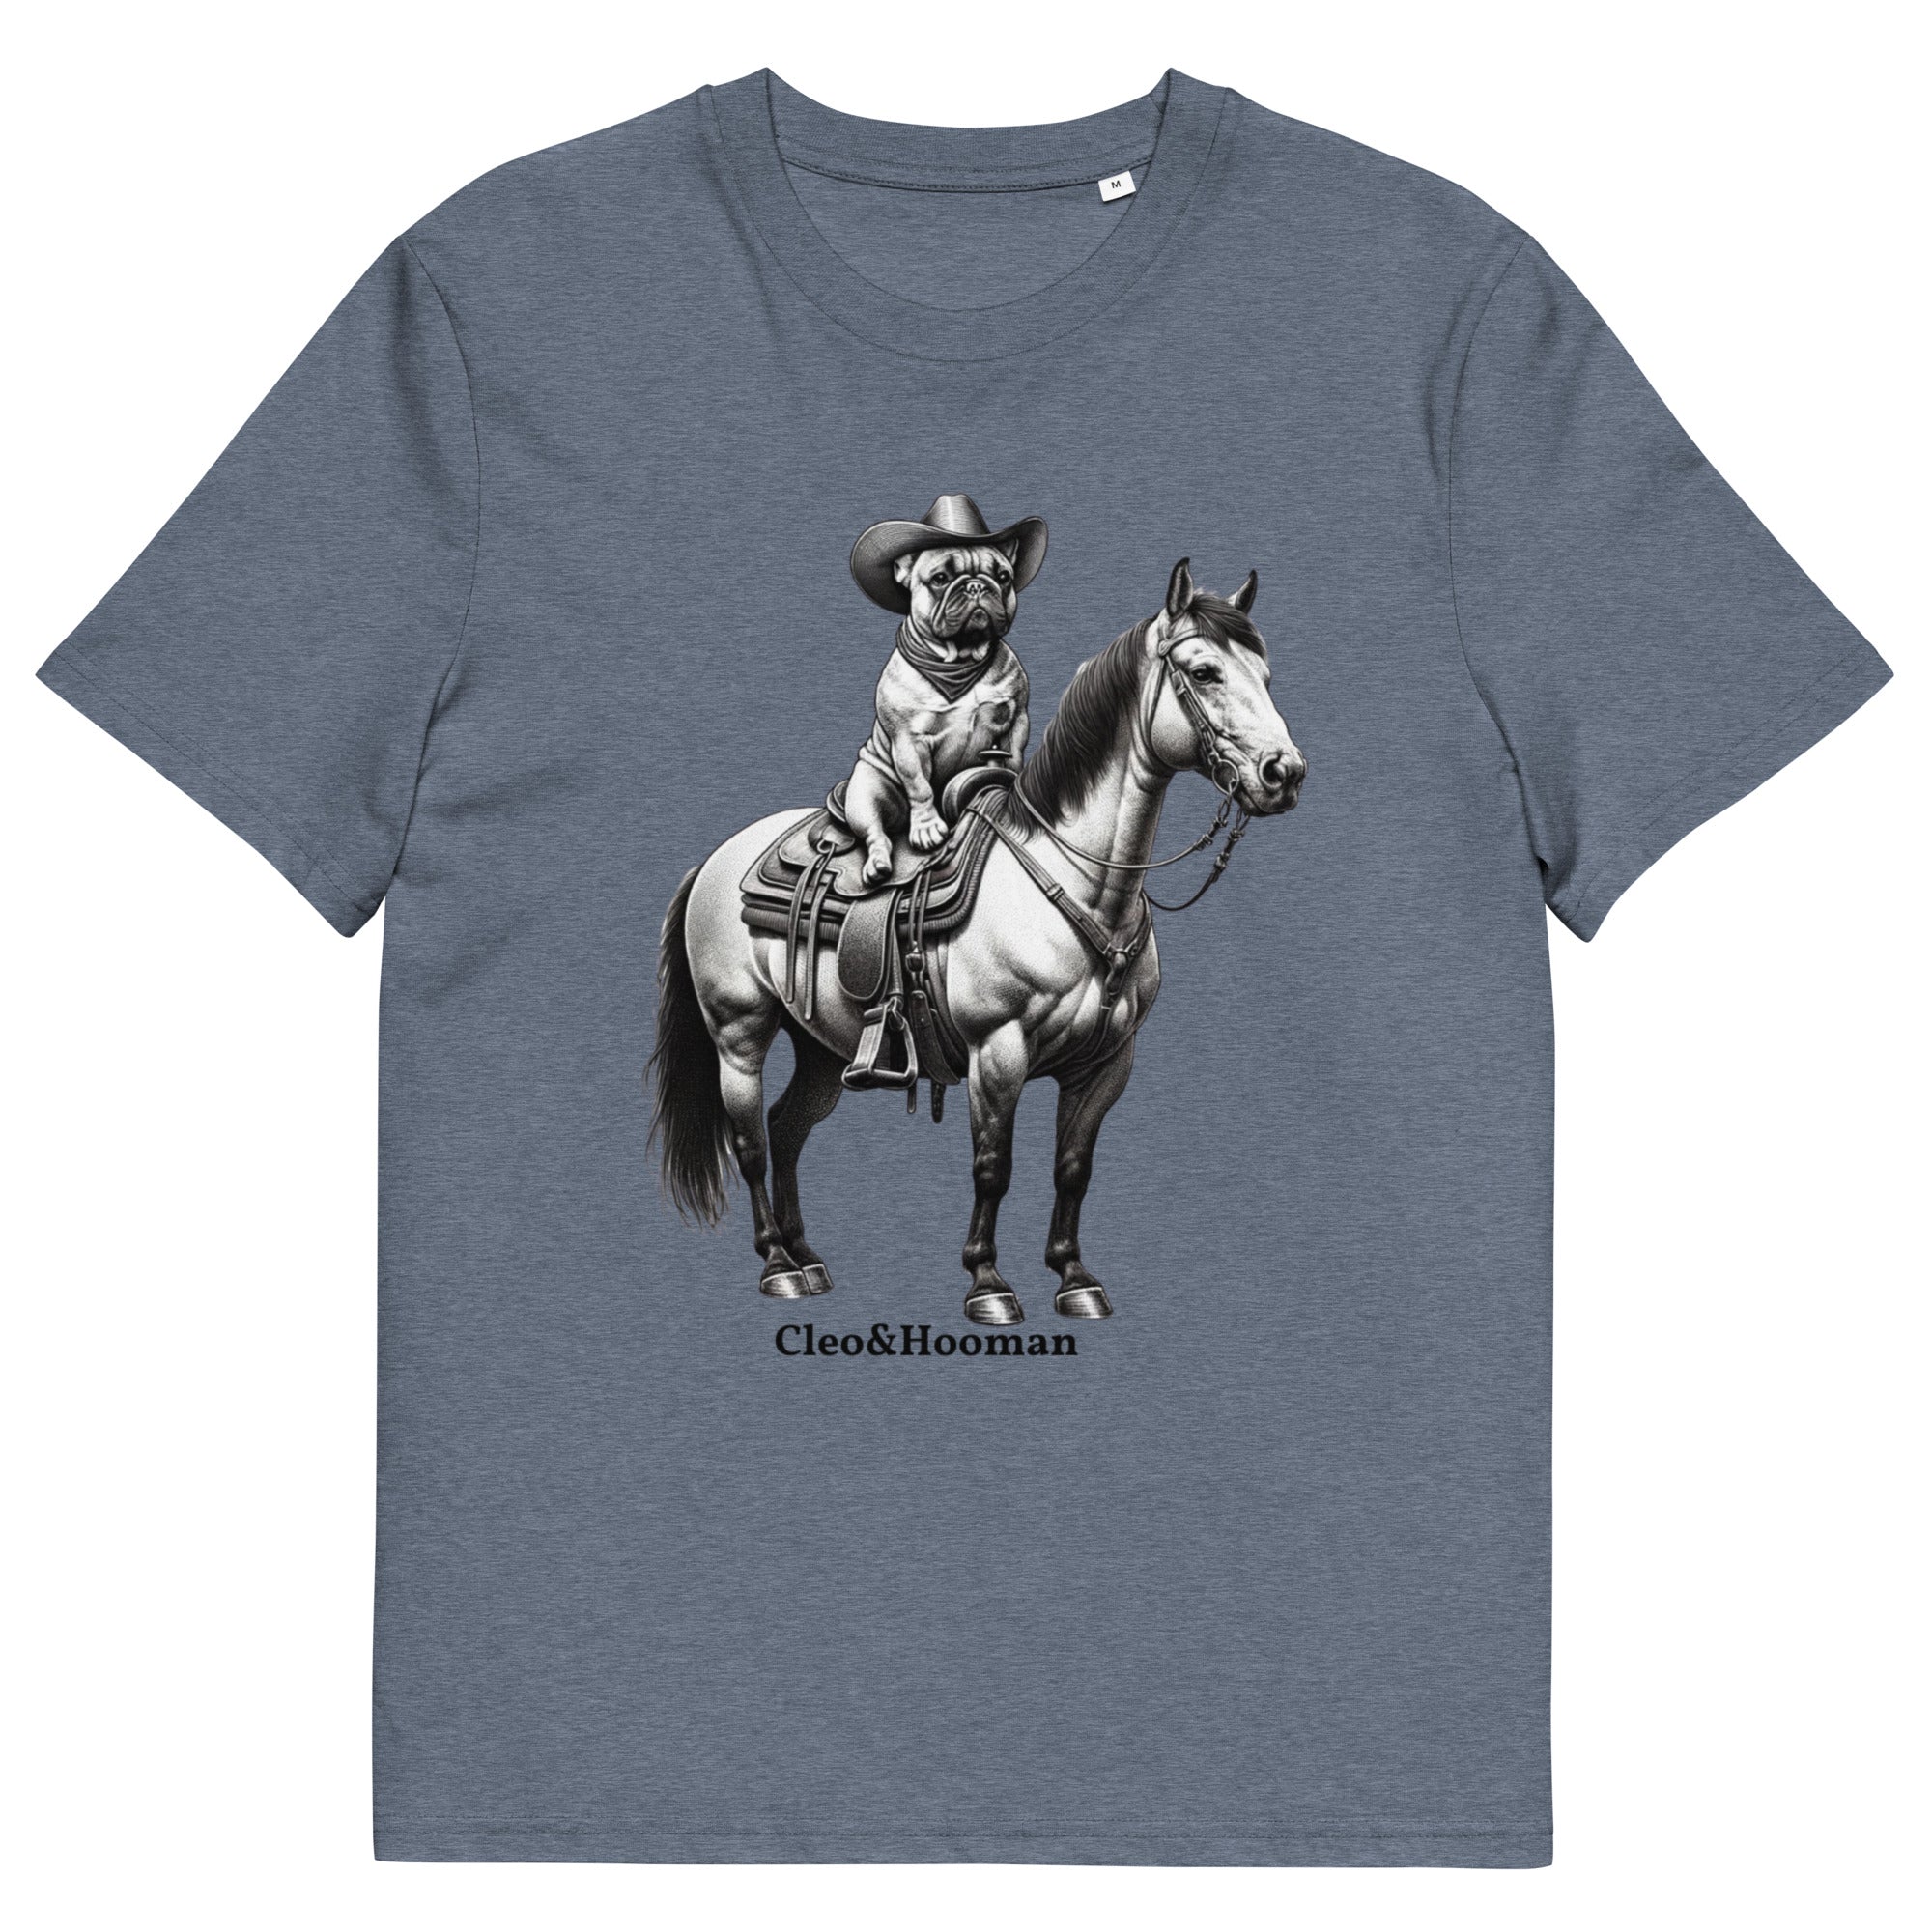 It's Not My First Rodeo Tee